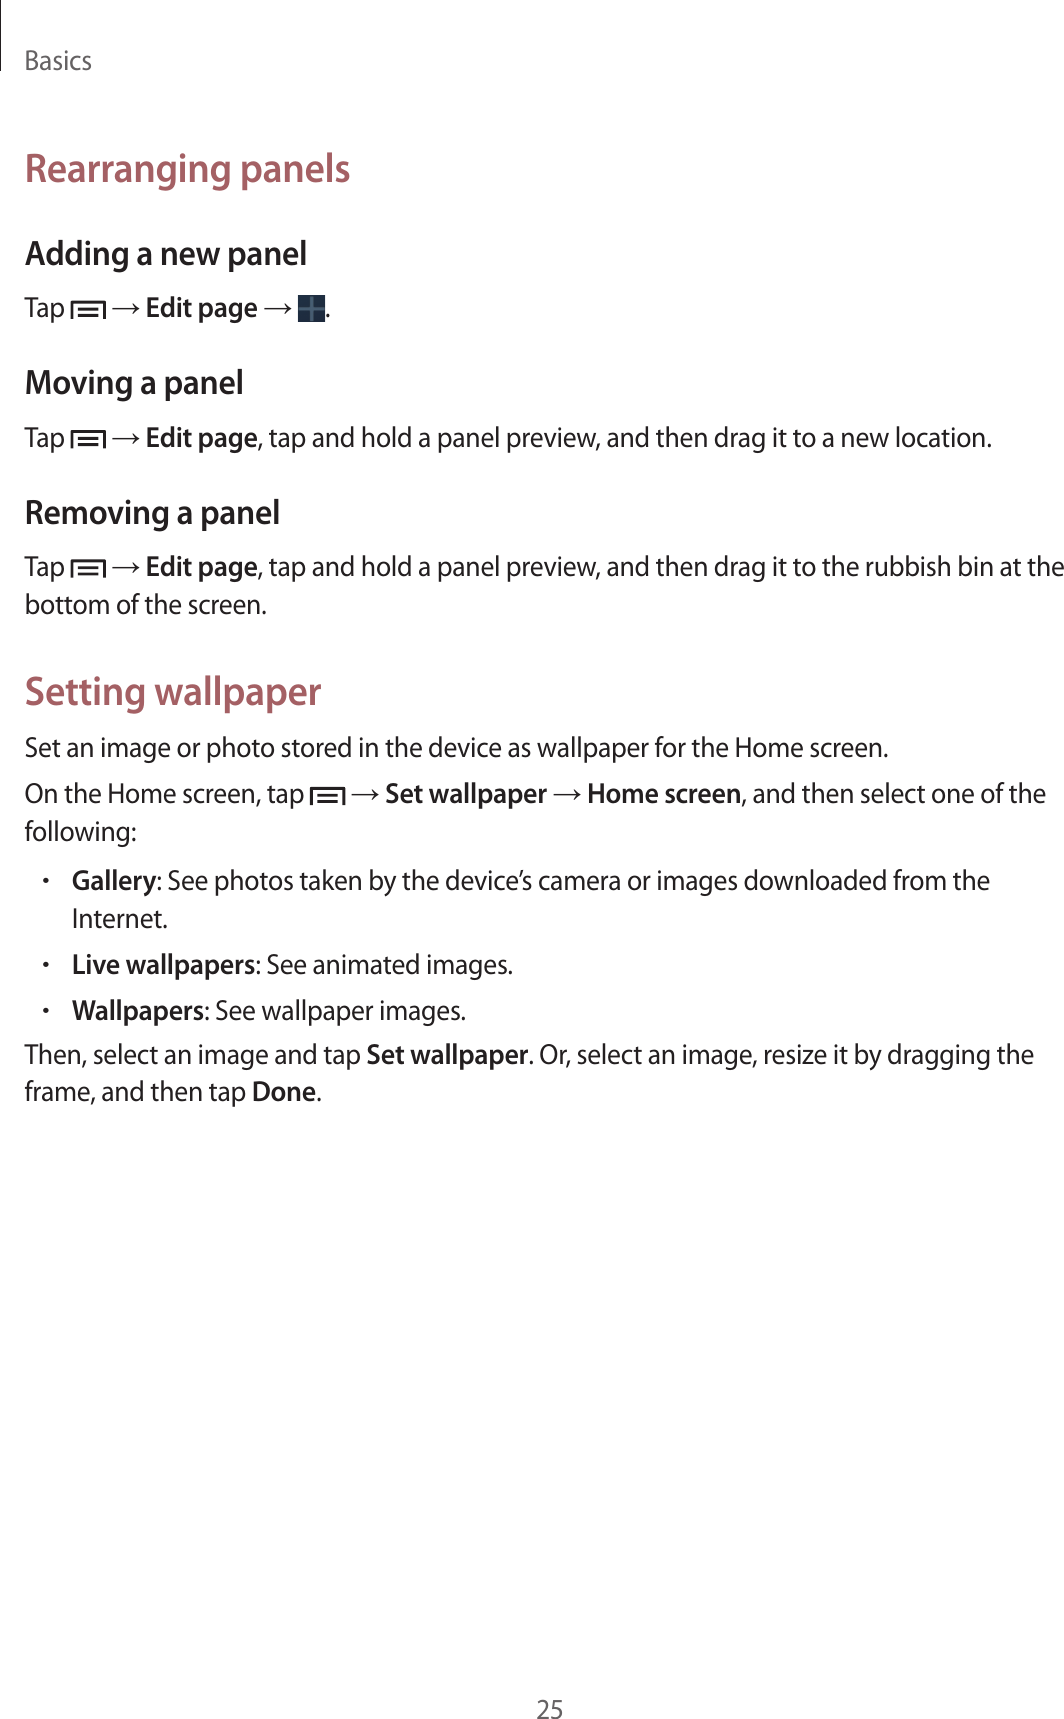 Basics25Rearranging panelsAdding a new panelTap   → Edit page →  .Moving a panelTap   → Edit page, tap and hold a panel preview, and then drag it to a new location.Removing a panelTap   → Edit page, tap and hold a panel preview, and then drag it to the rubbish bin at the bottom of the screen.Setting wallpaperSet an image or photo stored in the device as wallpaper for the Home screen.On the Home screen, tap   → Set wallpaper → Home screen, and then select one of the following:•Gallery: See photos taken by the device’s camera or images downloaded from the Internet.•Live wallpapers: See animated images.•Wallpapers: See wallpaper images.Then, select an image and tap Set wallpaper. Or, select an image, resize it by dragging the frame, and then tap Done.